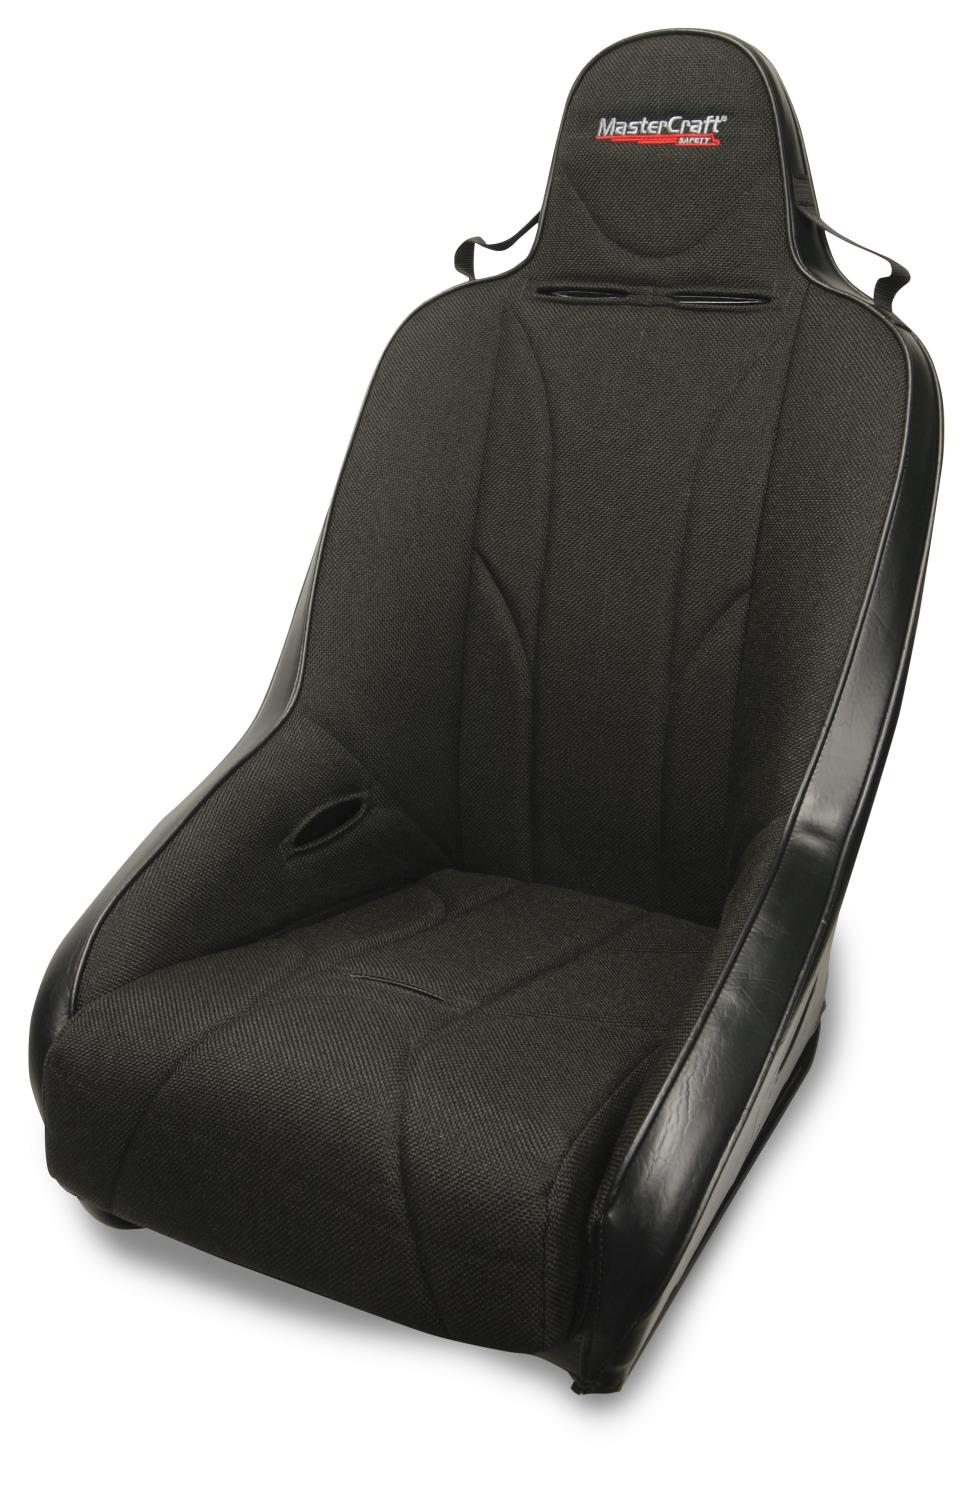 561114 1 in. WIDER PROSeat w/Fixed Headrest, Black with Black Fabric Removable Cushion, Black Side Panels, Black Band